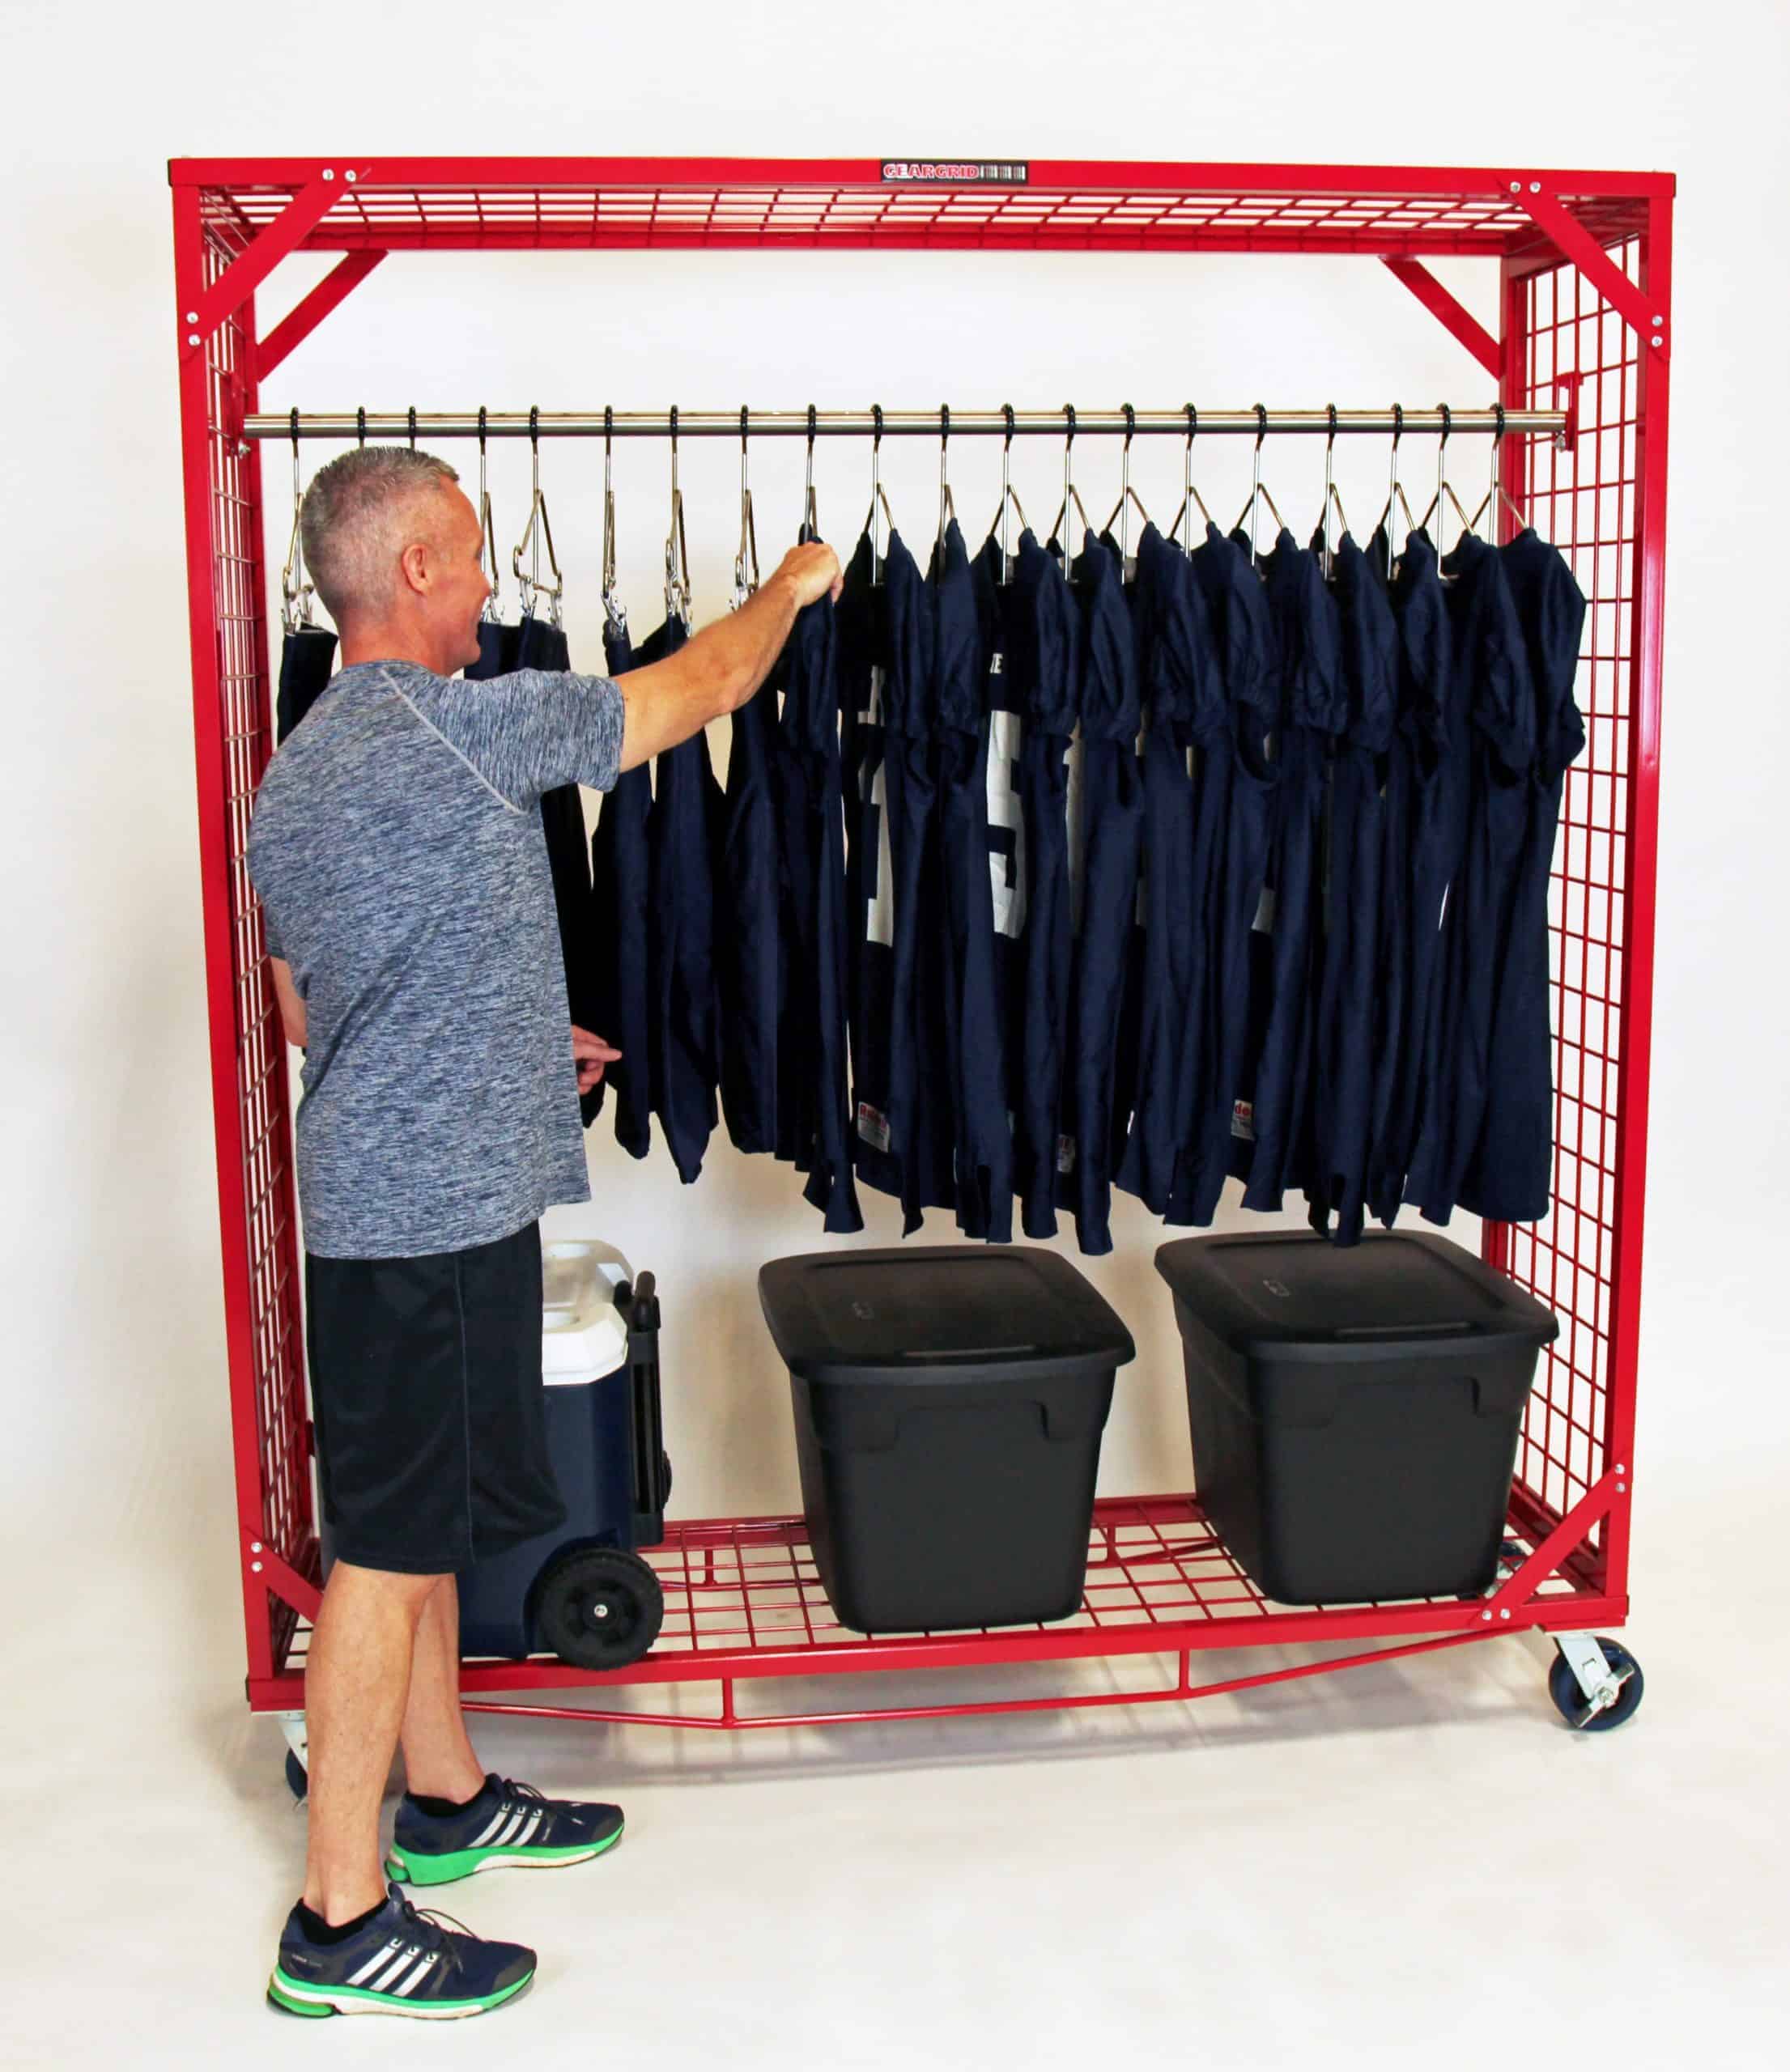 https://www.geargrid.com/wp-content/uploads/2017/01/geargrid-athletic-and-education-mobile-general-storage-and-organization-team-drying-rack-storage-of-athletic-gear-and-equipment-with-stainless-steel-hanging-rod-red-scaled.jpg